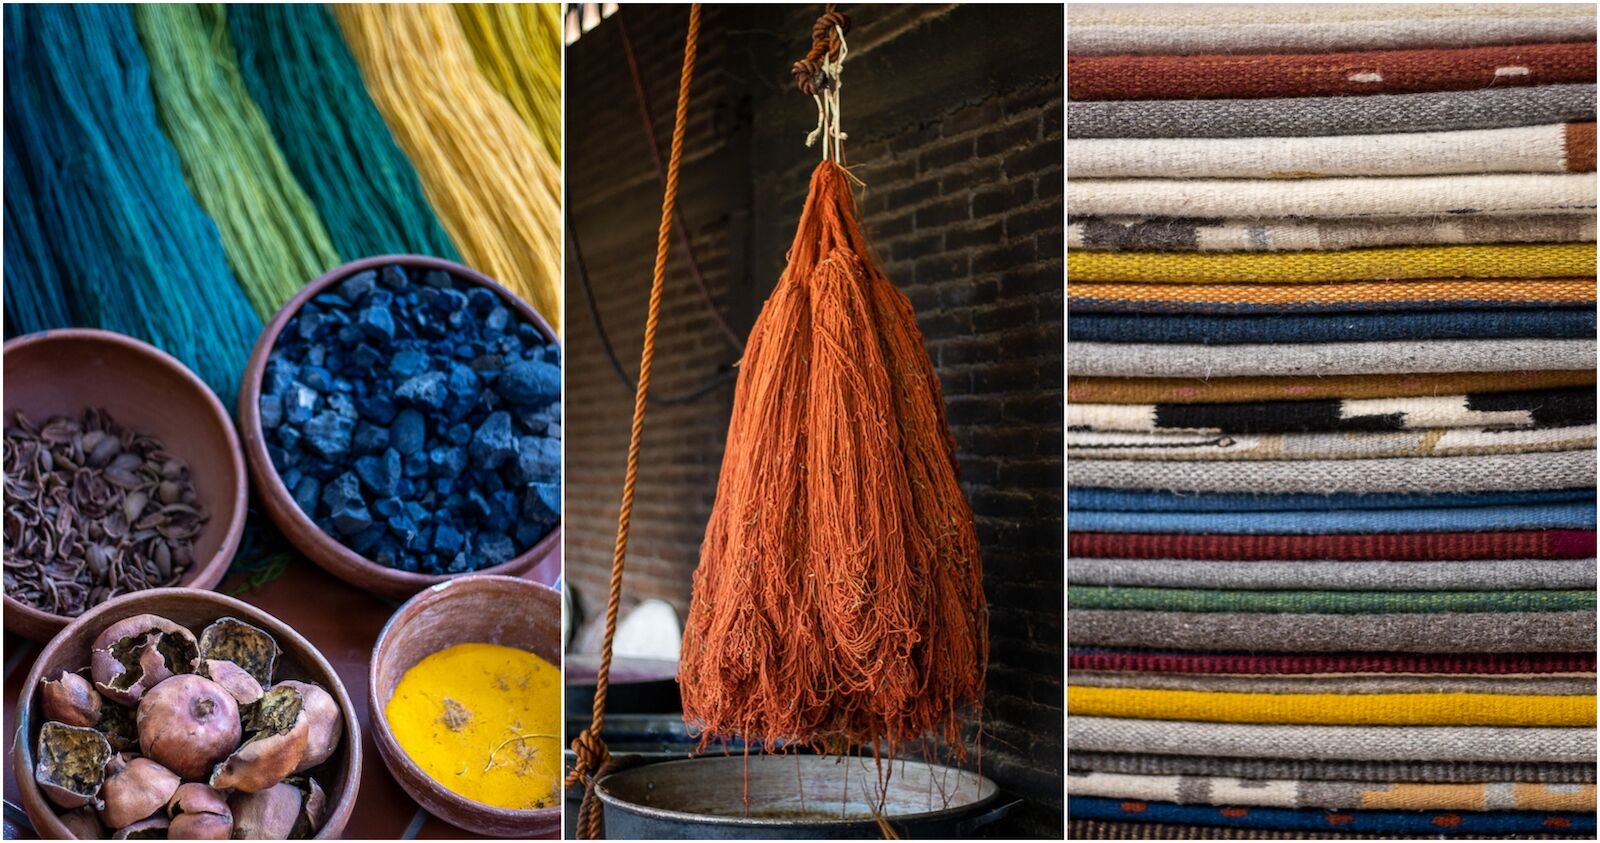 Weavers in Oaxaca, Mexico, use natural ingredients to dye their fibers to create Zapotec rugs